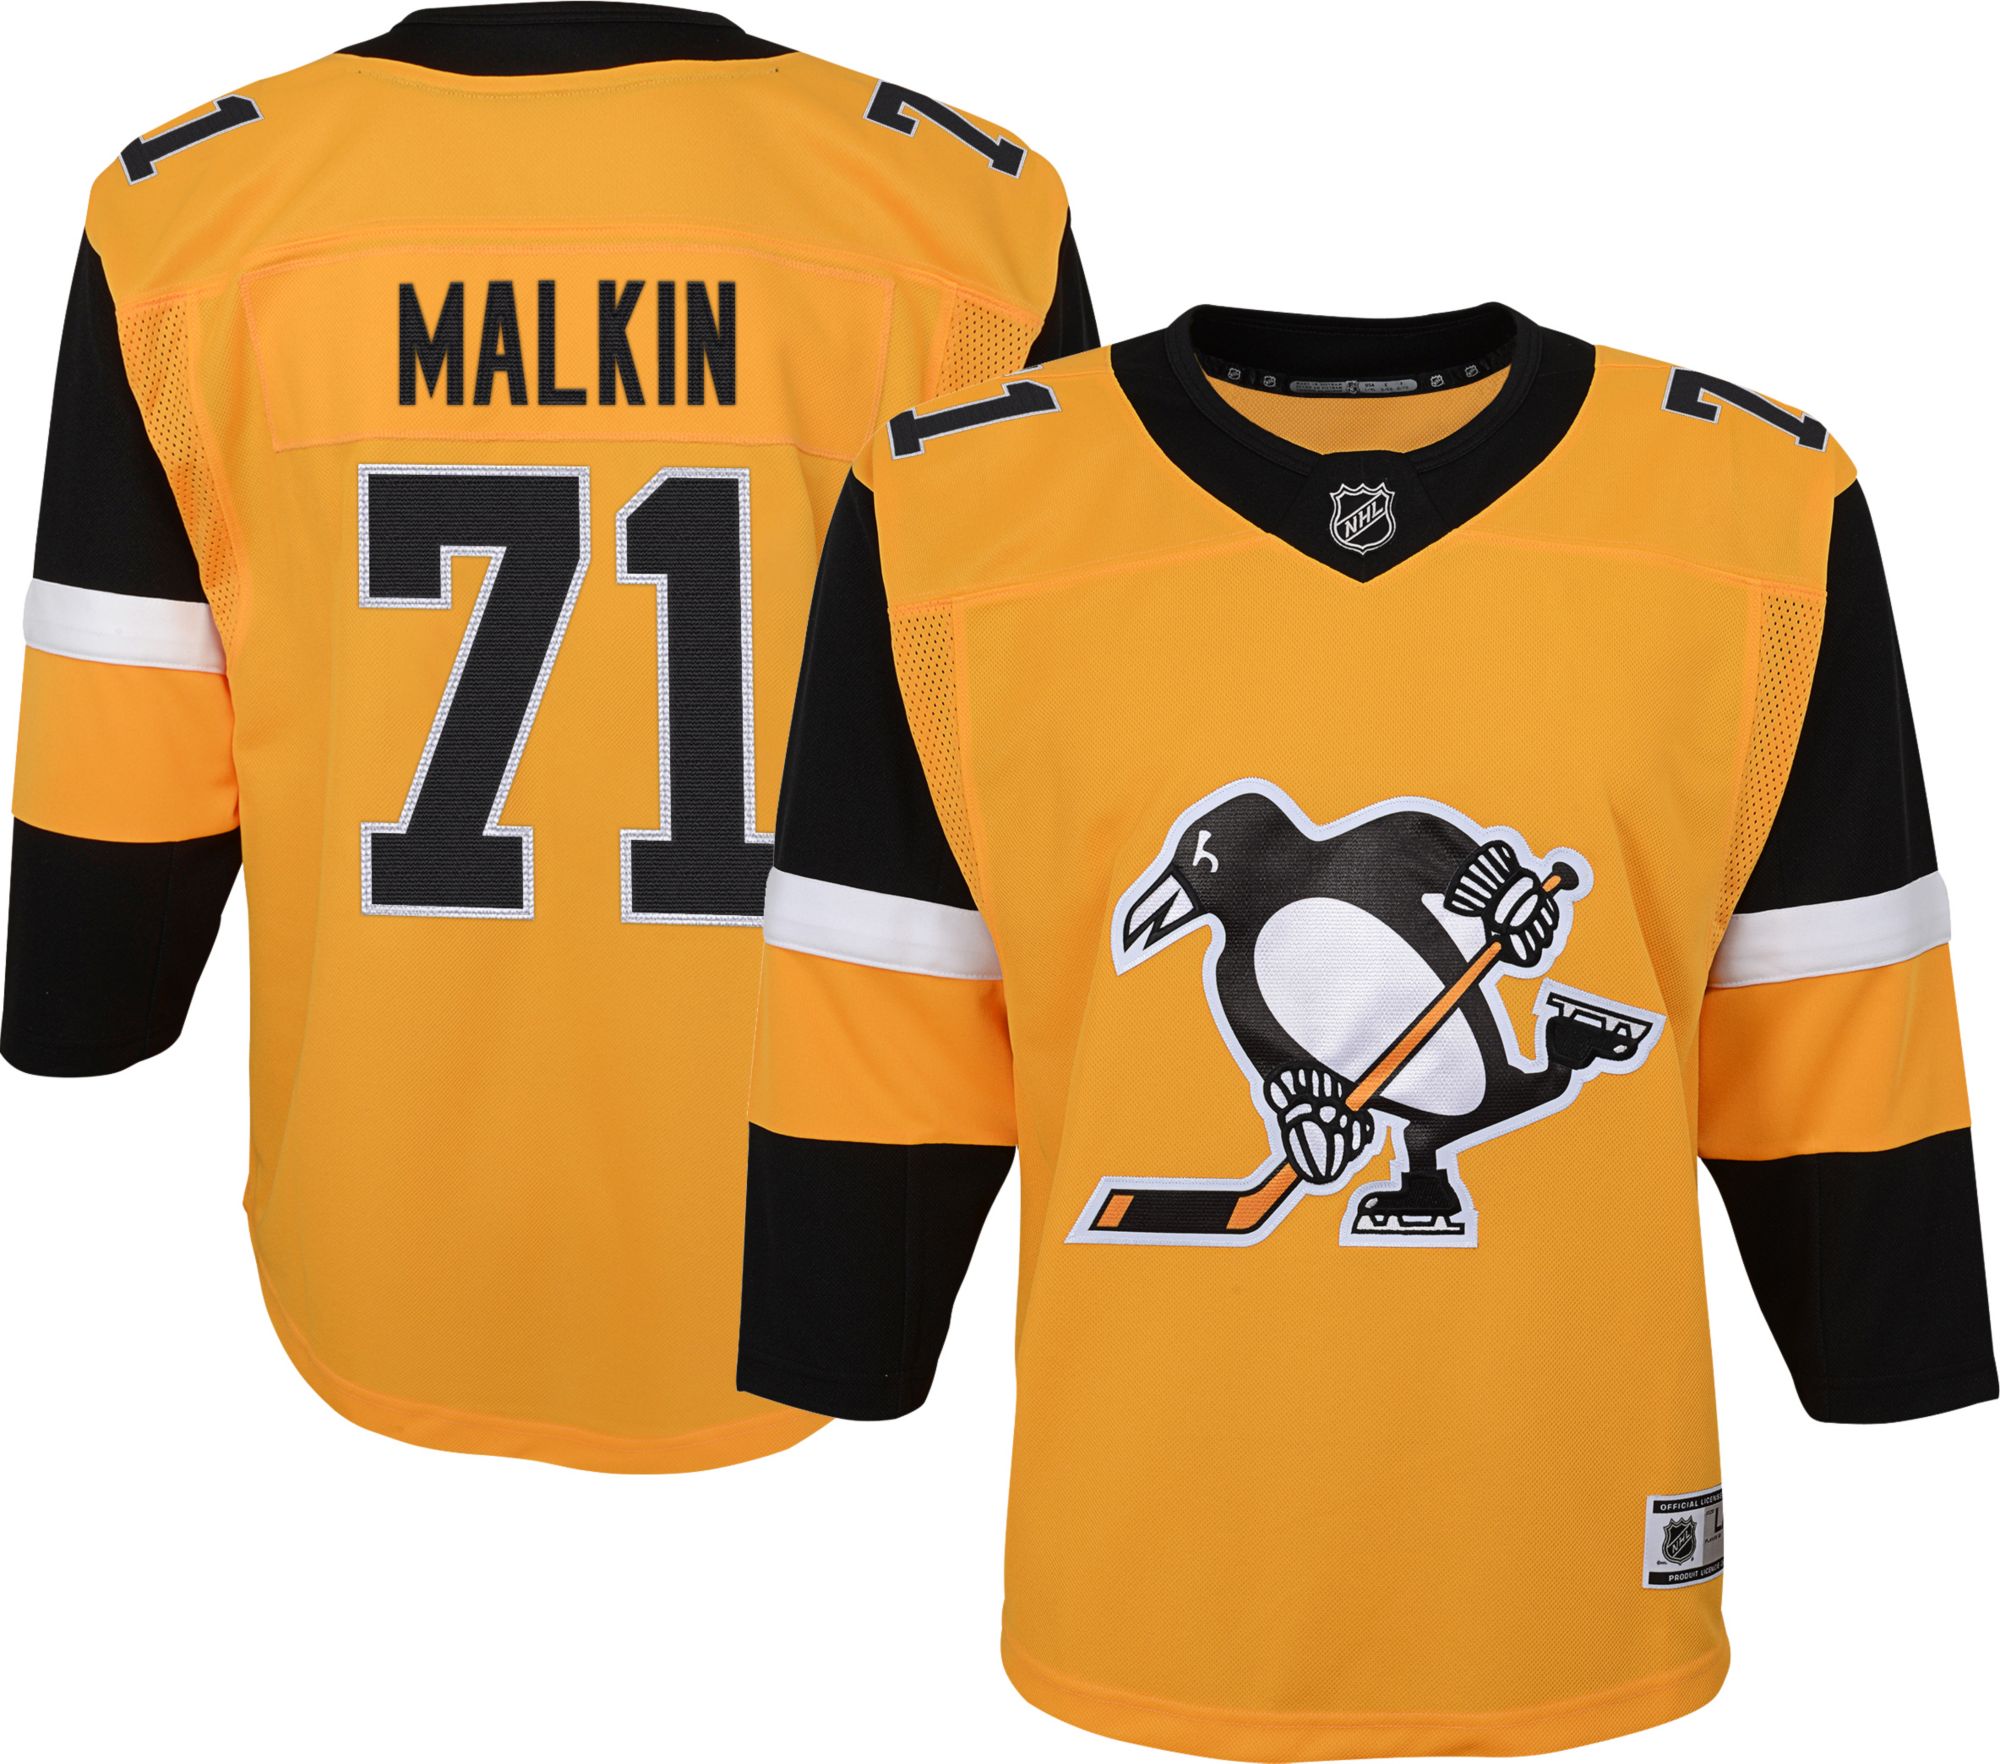 pittsburgh penguins youth hockey jersey